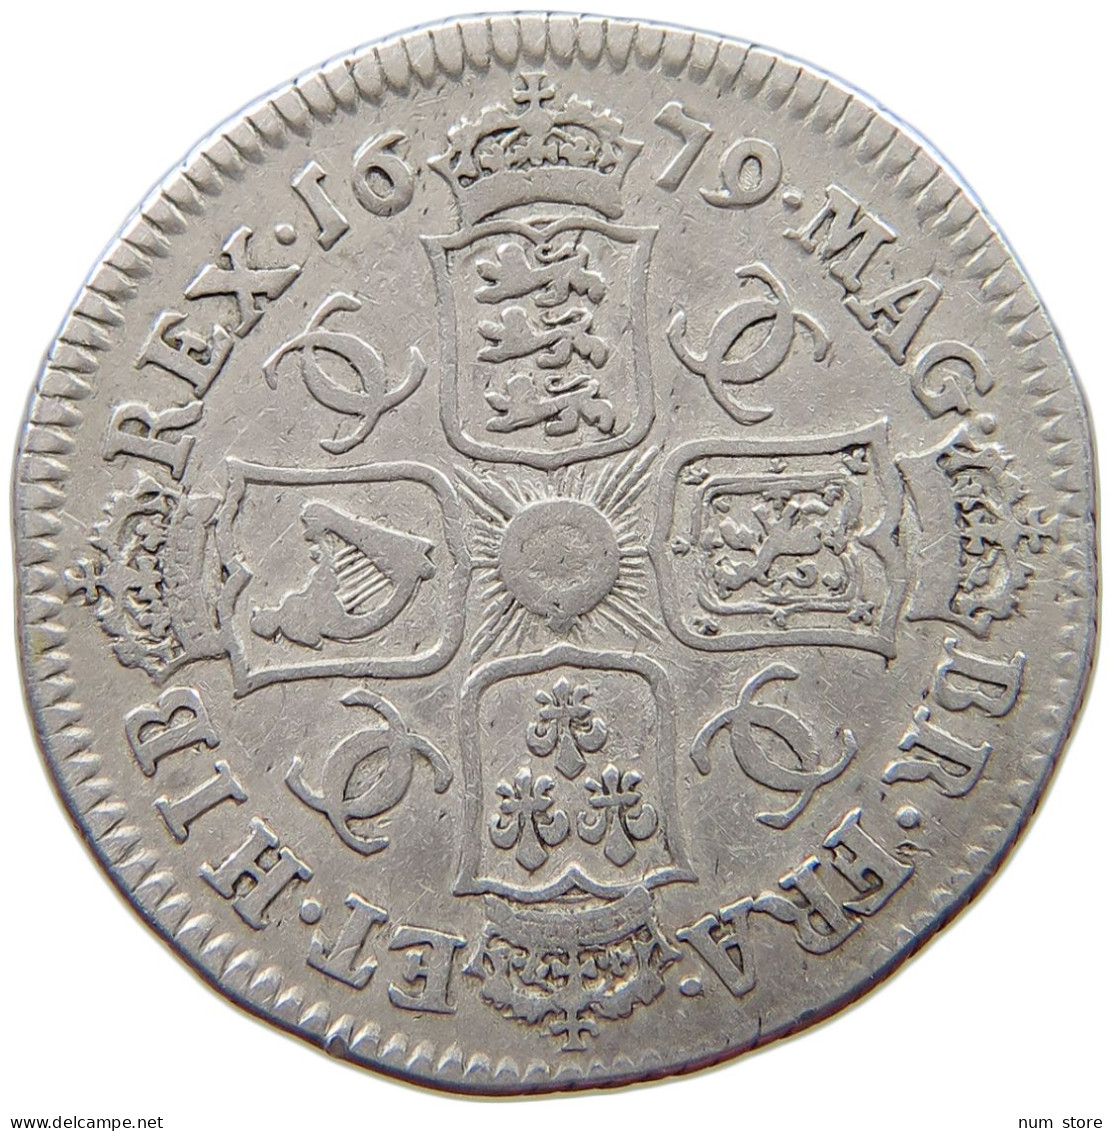 GREAT BRITAIN SHILLING 1679 CHARLES II. (1660-1685) RARE #t148 0253 - H. 1 Shilling